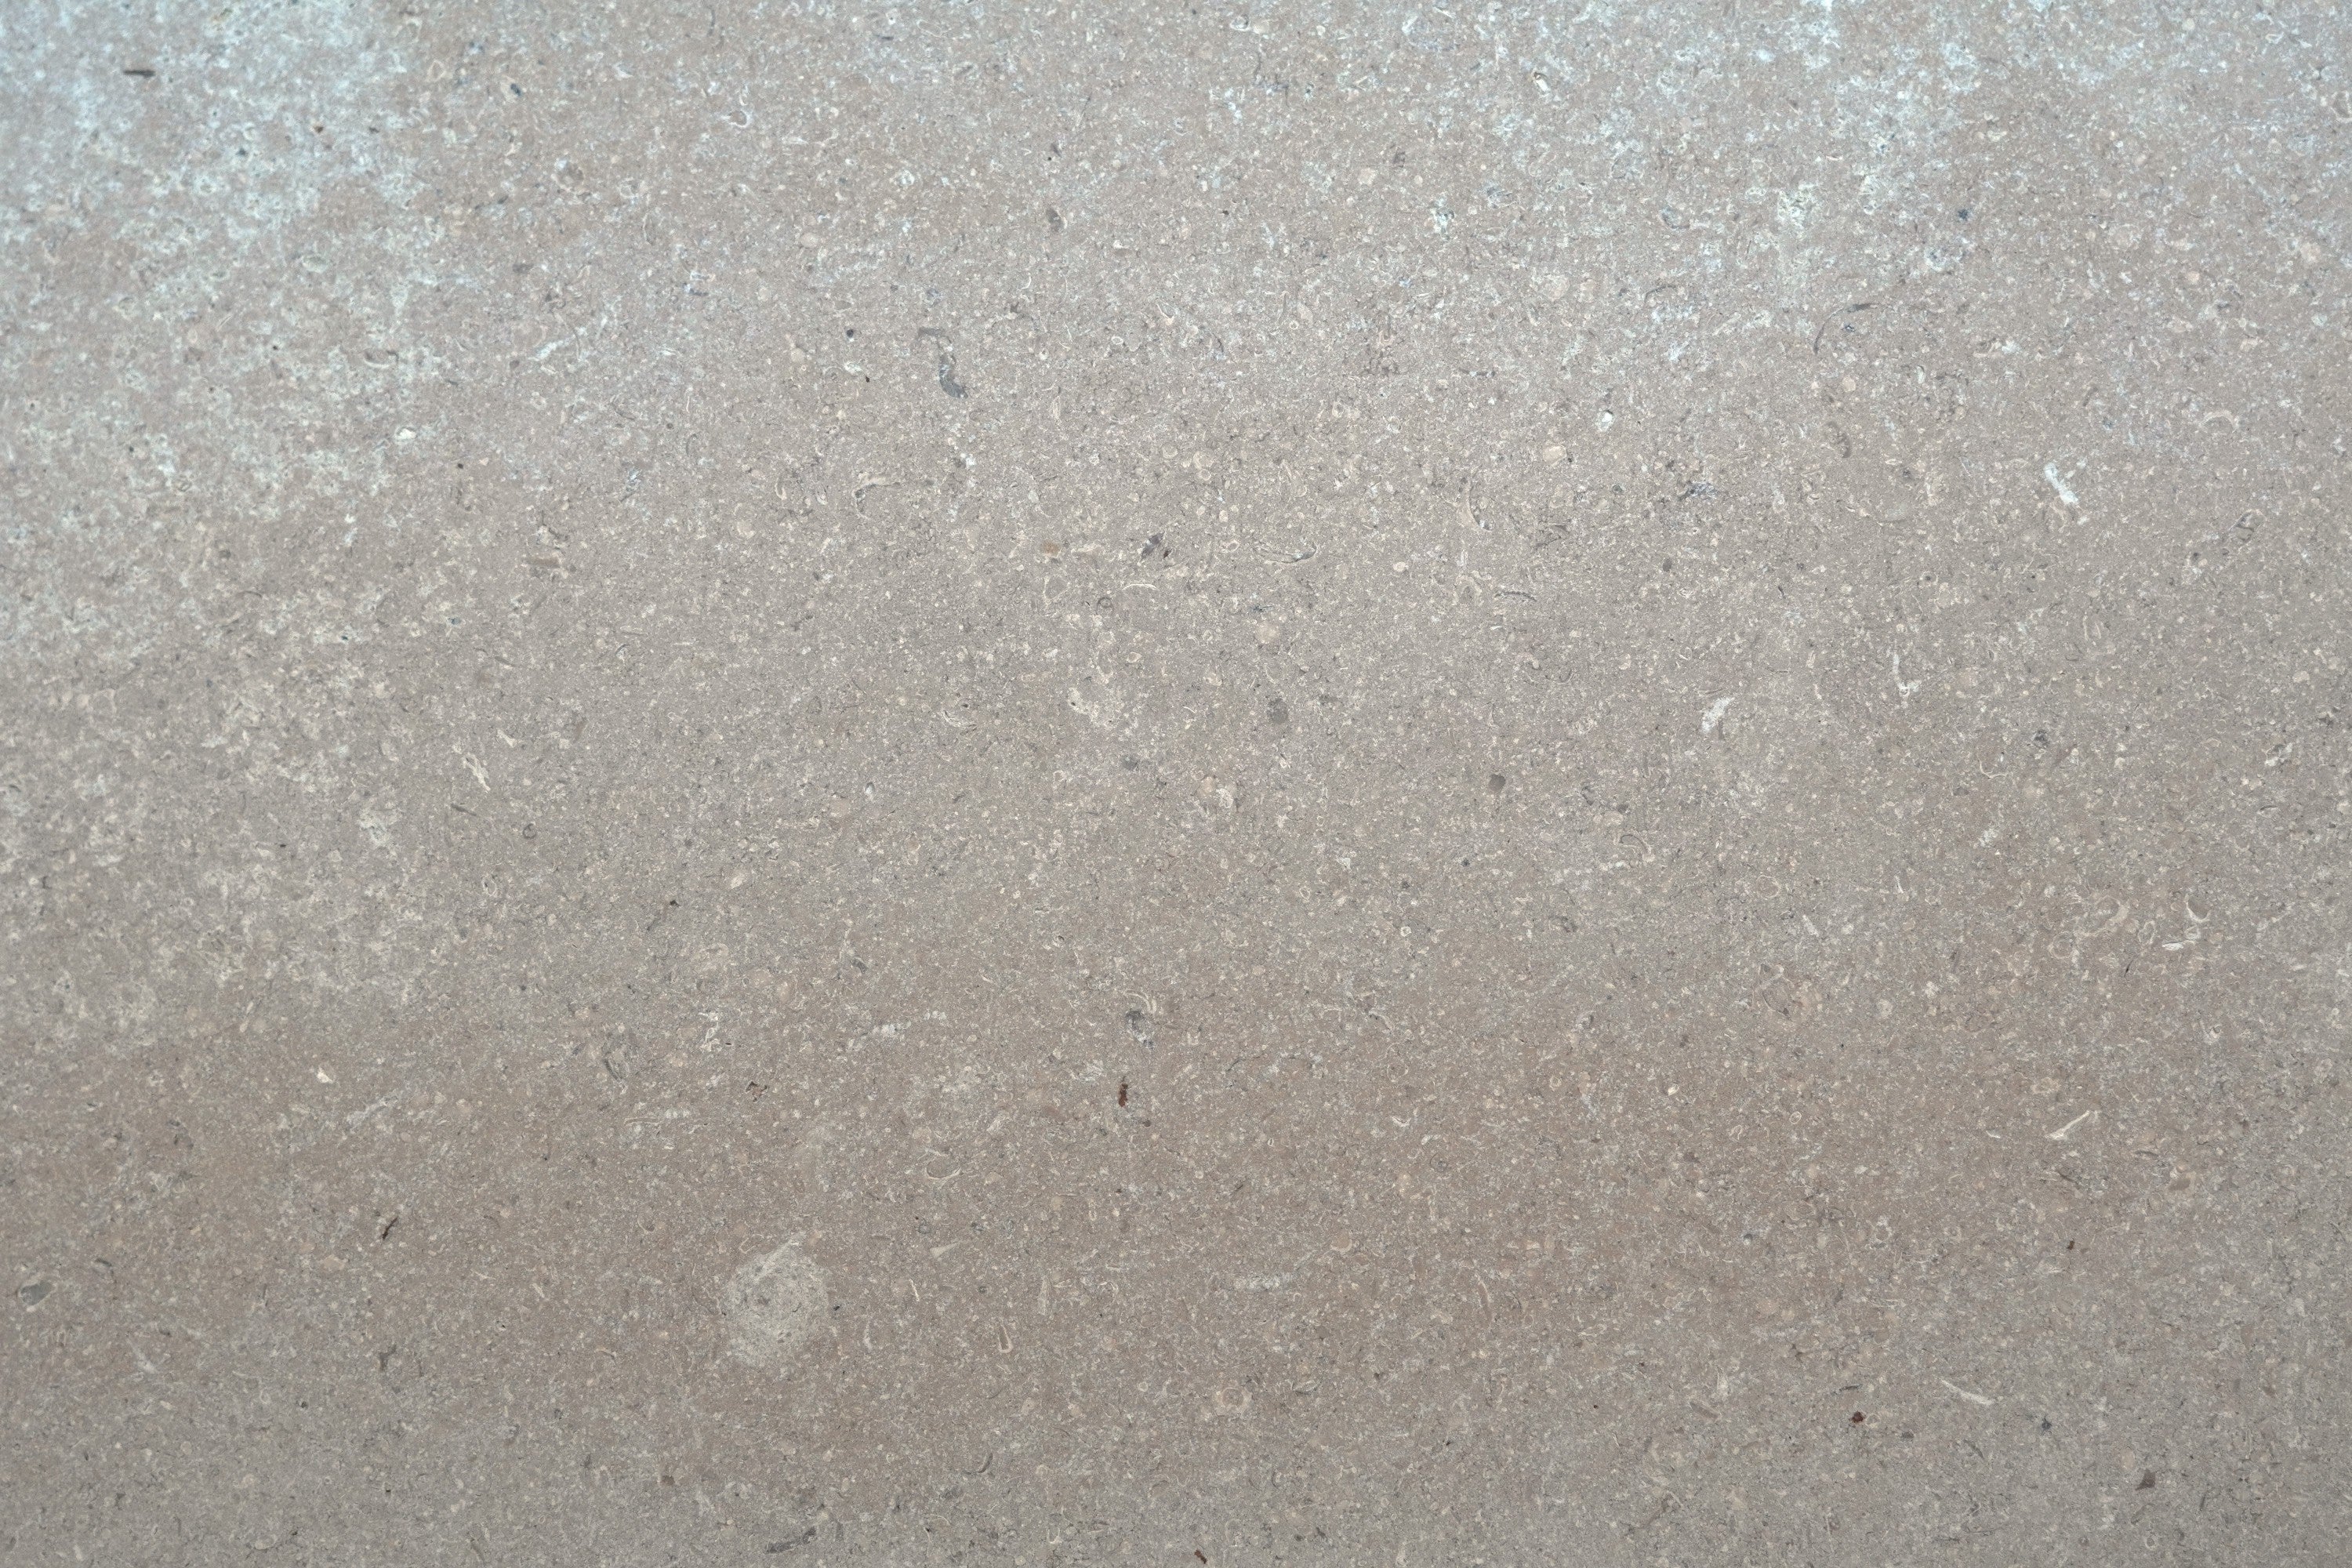 beige tumbled natural limestone field tile champagne taupe width of 8 length of 8 and thickness of 0.625 sold to you by surface group international